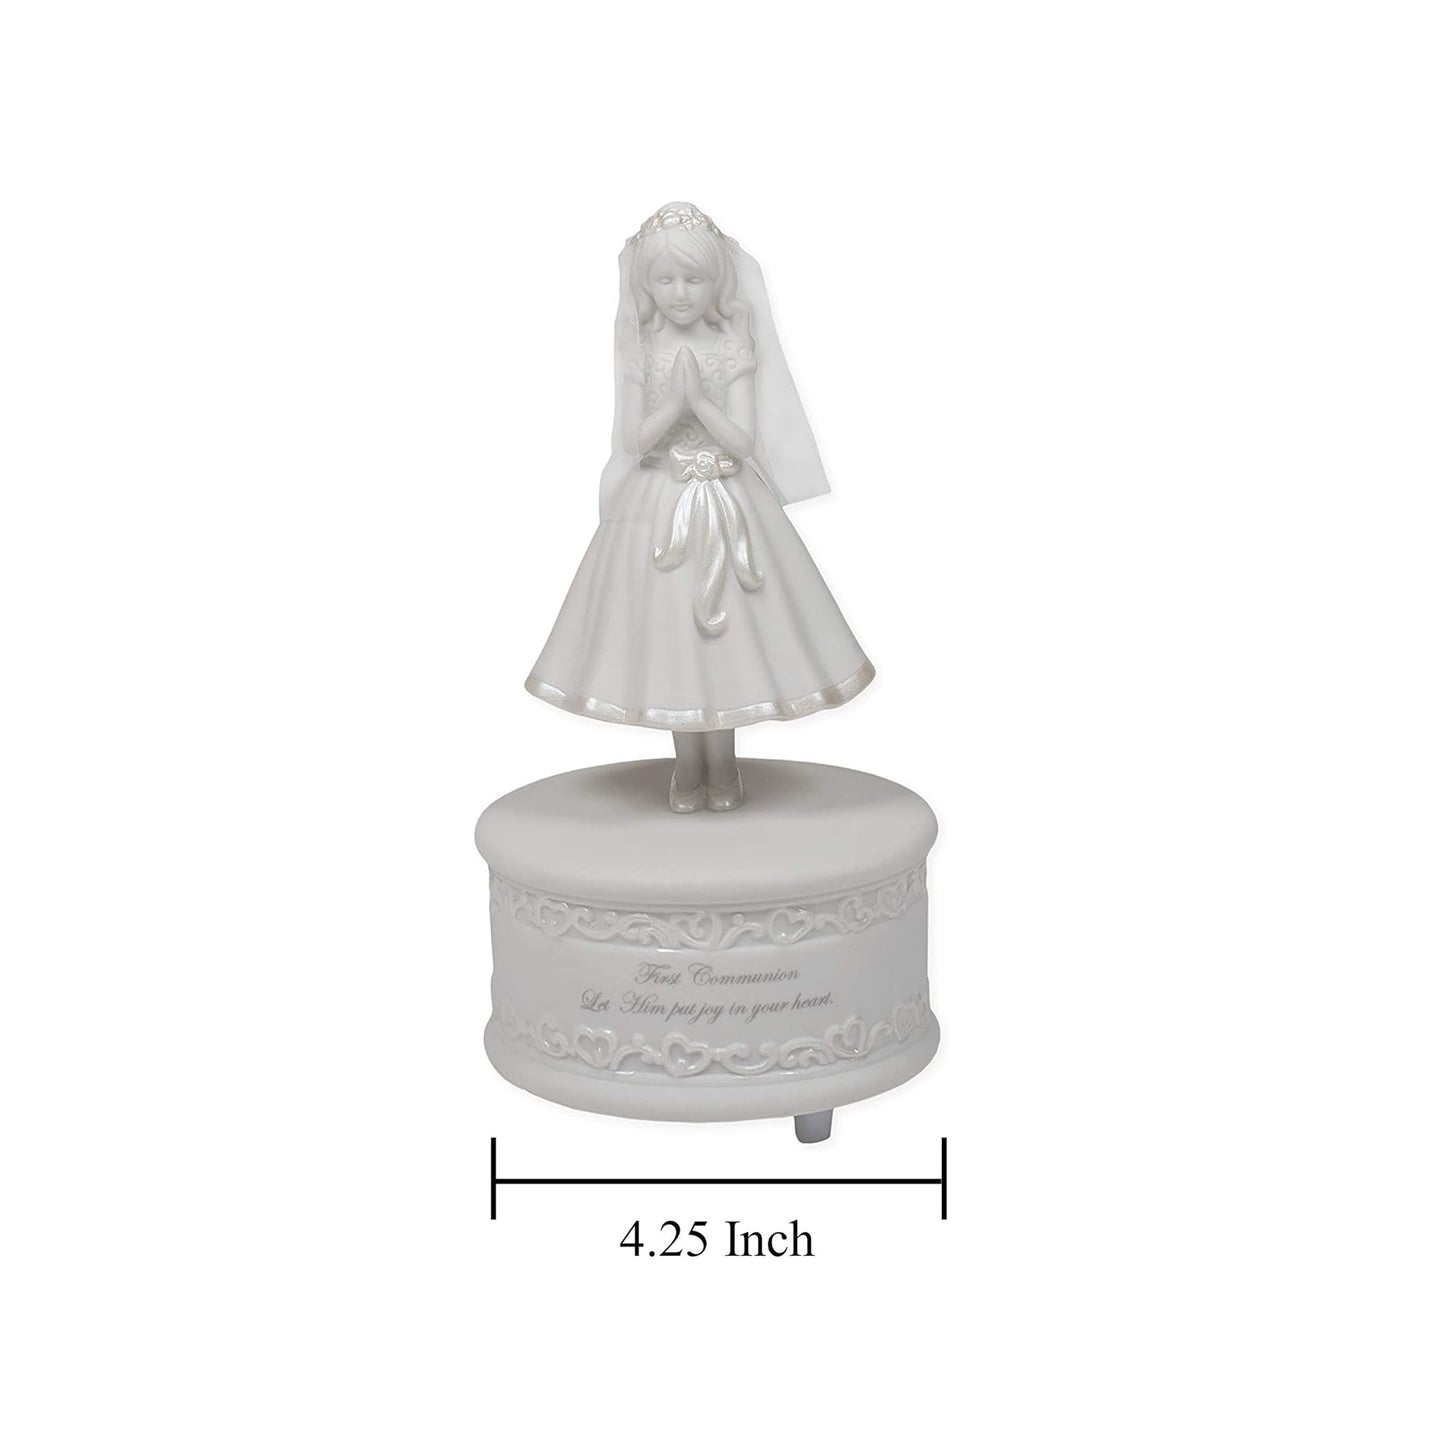 First Communion Girl Musical Figure by Roman